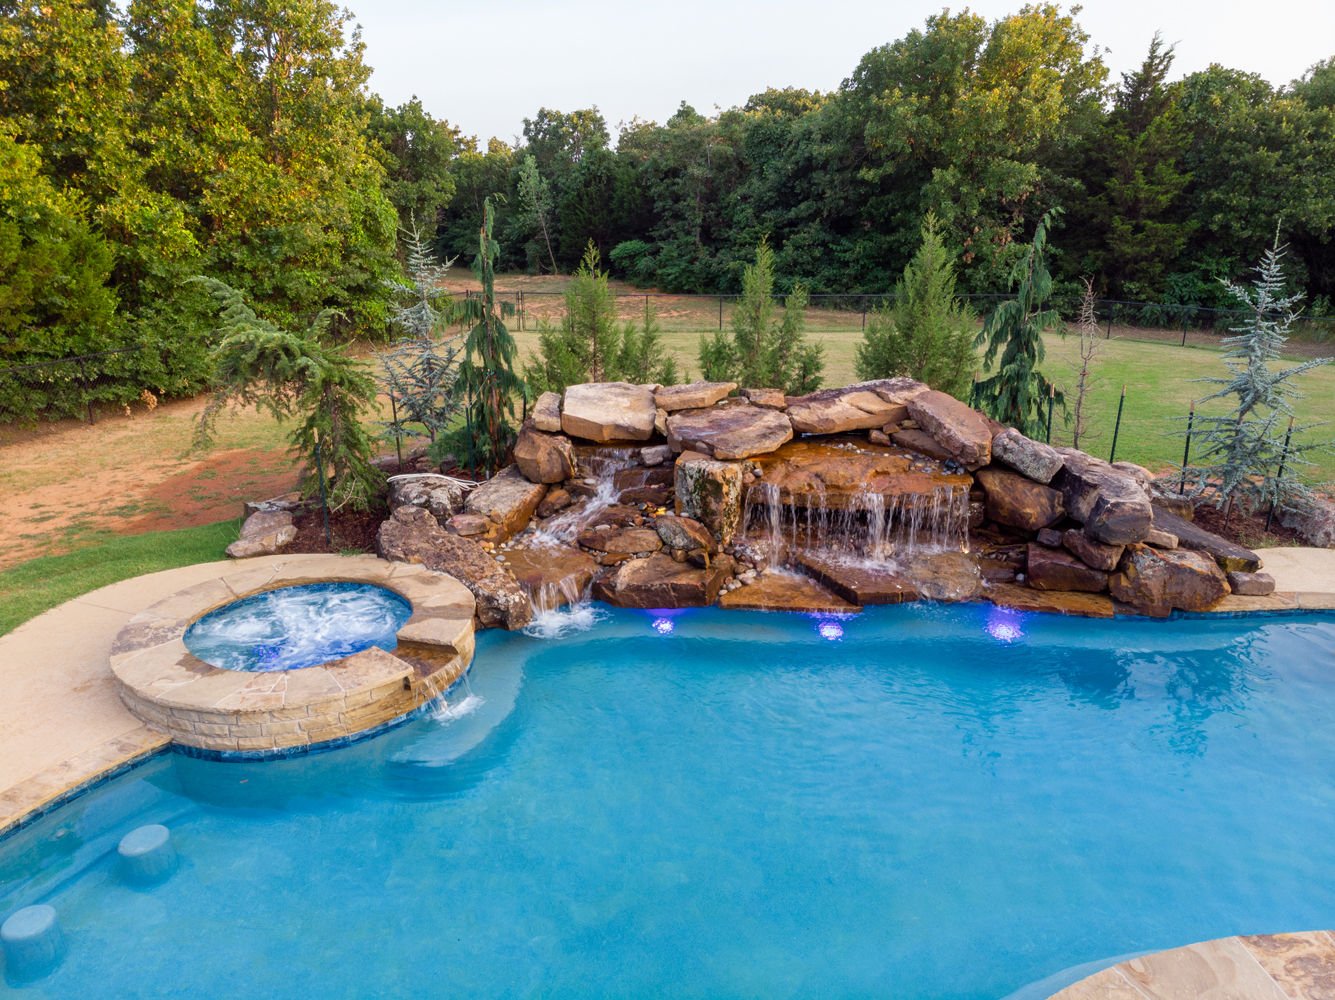 What Are the Best Options for Financing a Pool